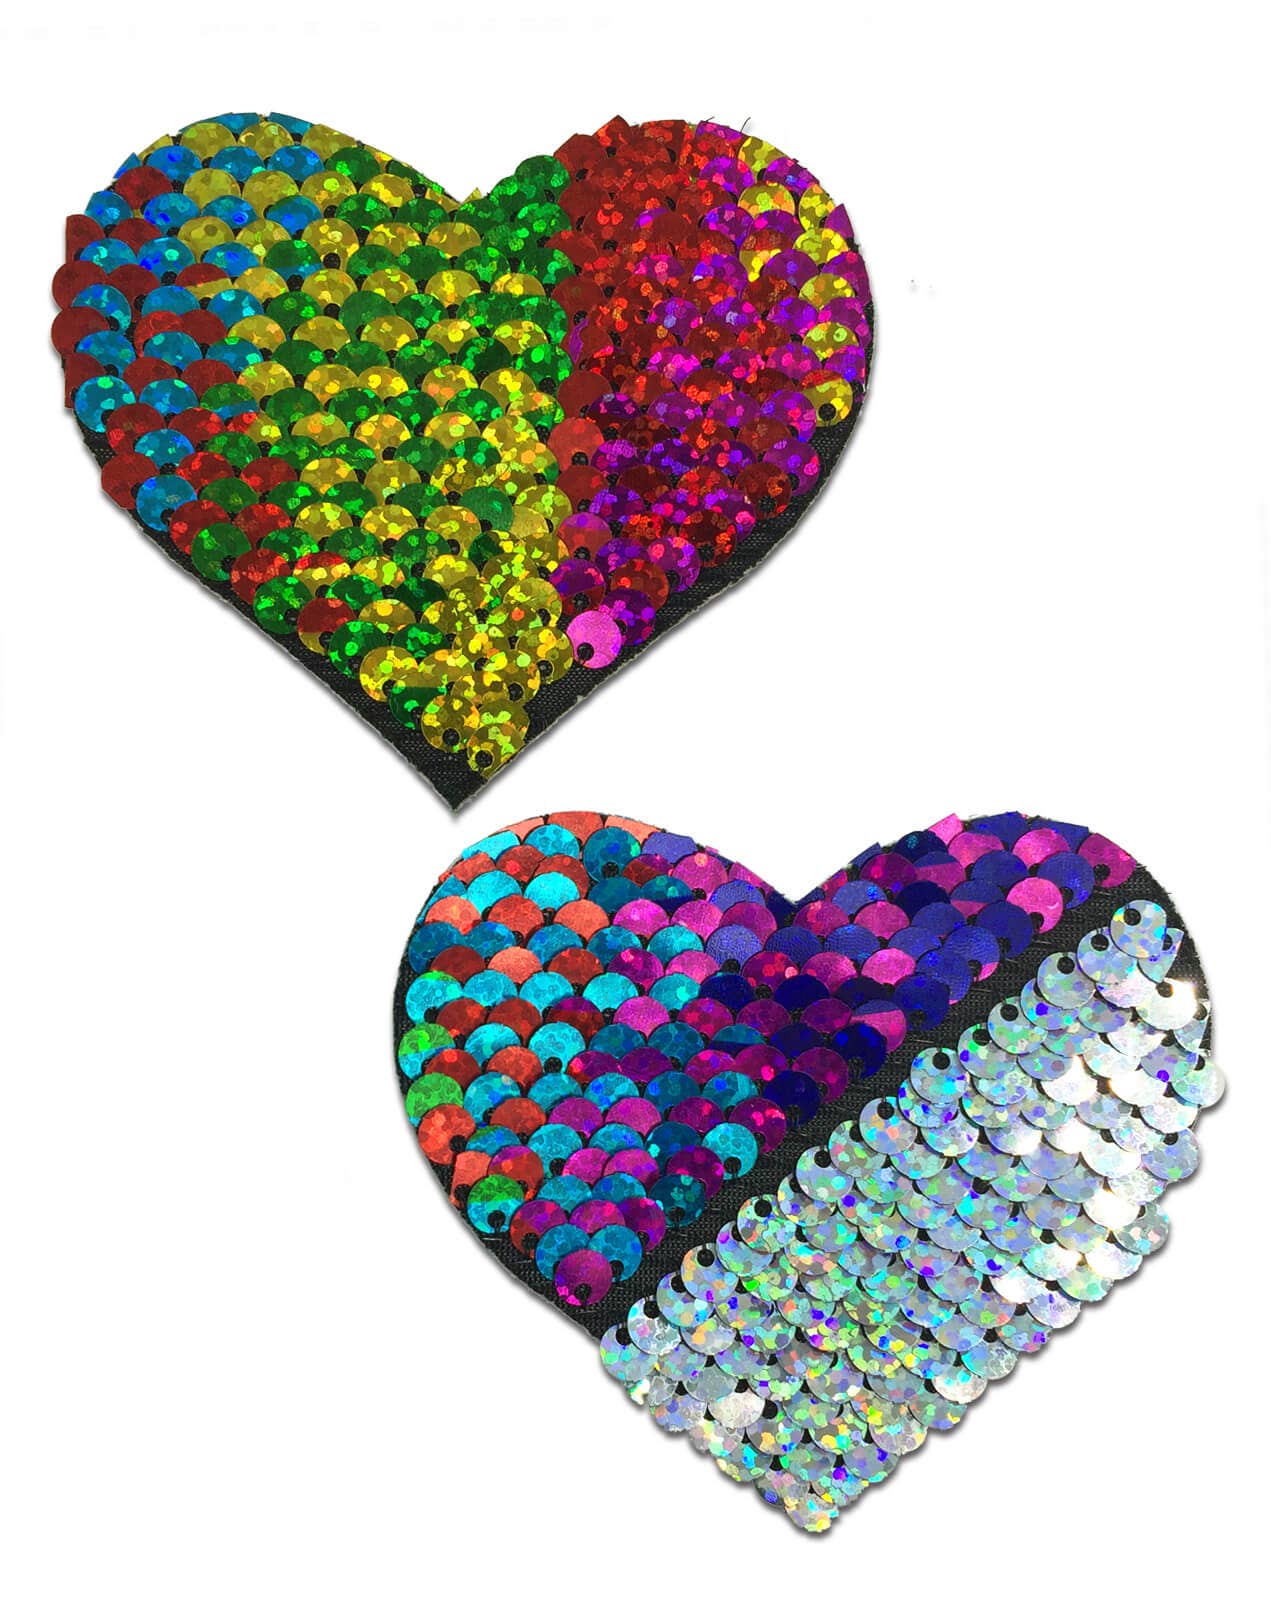 NEW PASTEASE Love Glitter Color Changing Sequin Heart Pasties in Rainbow SALE